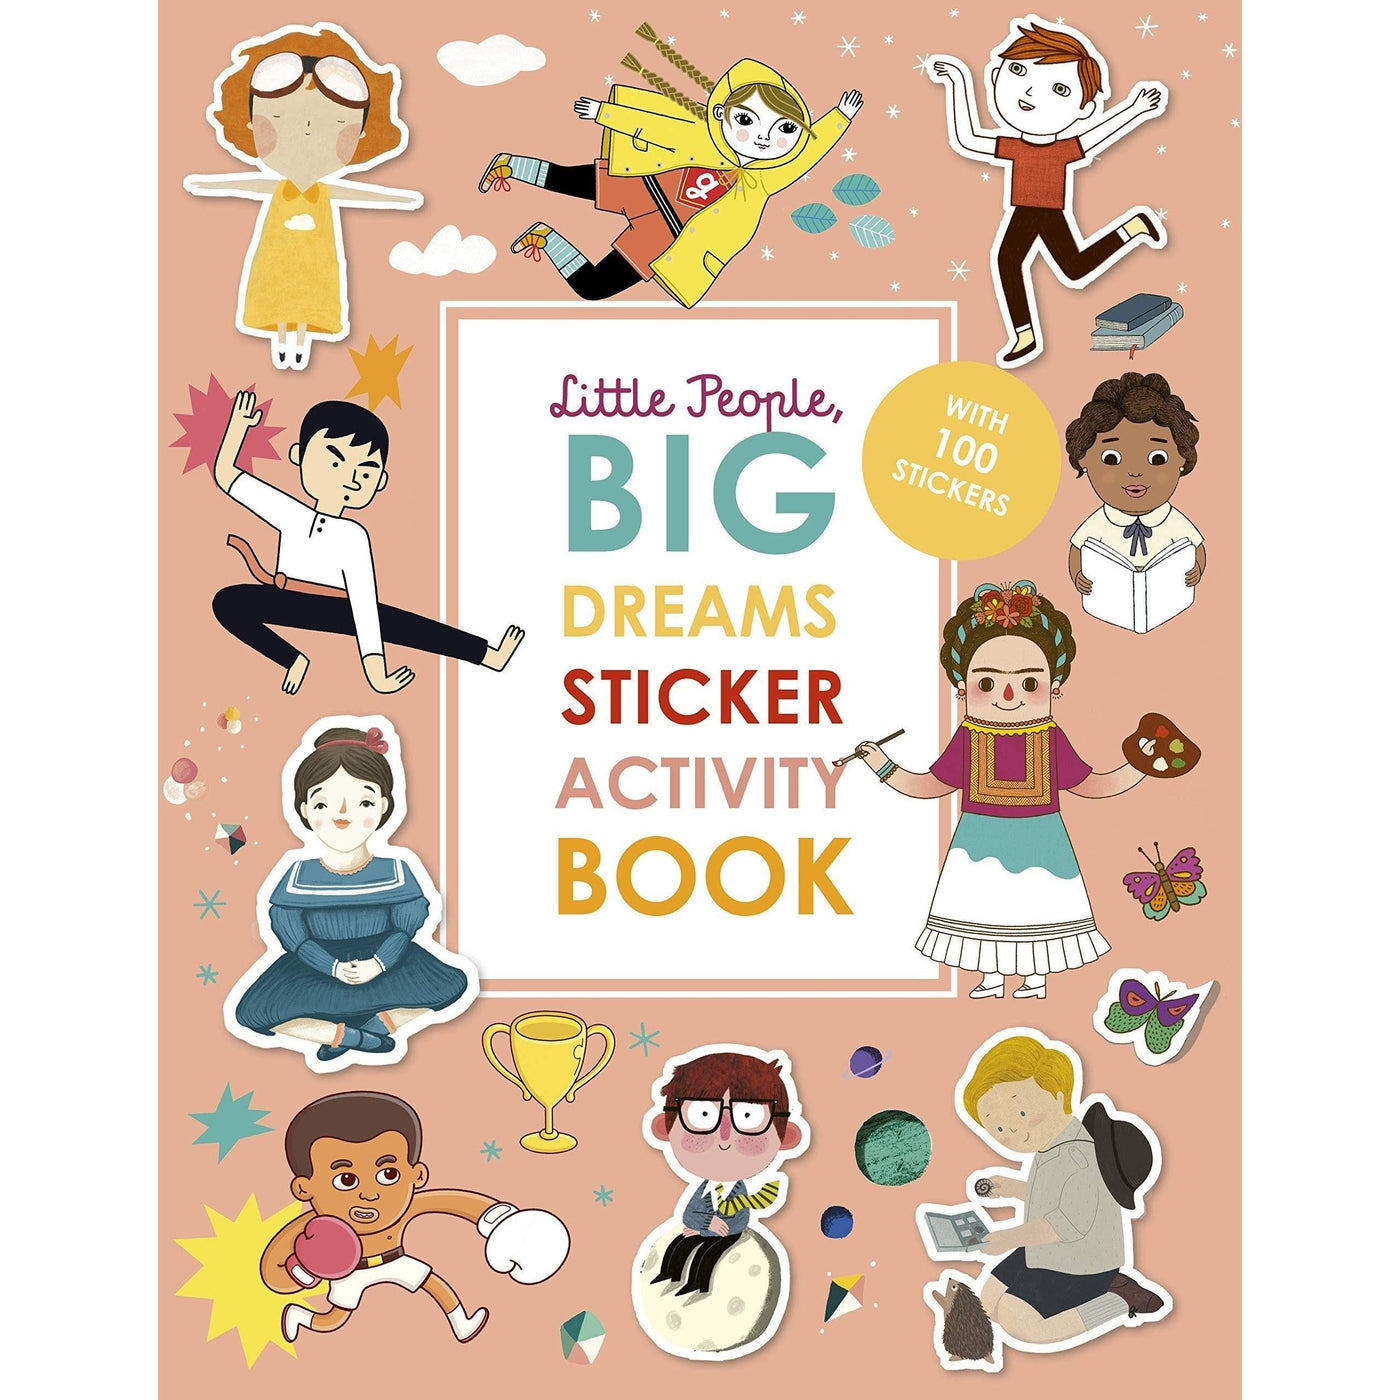 Little People, Big Dreams Sticker Activity Book: With Over 100 Stickers